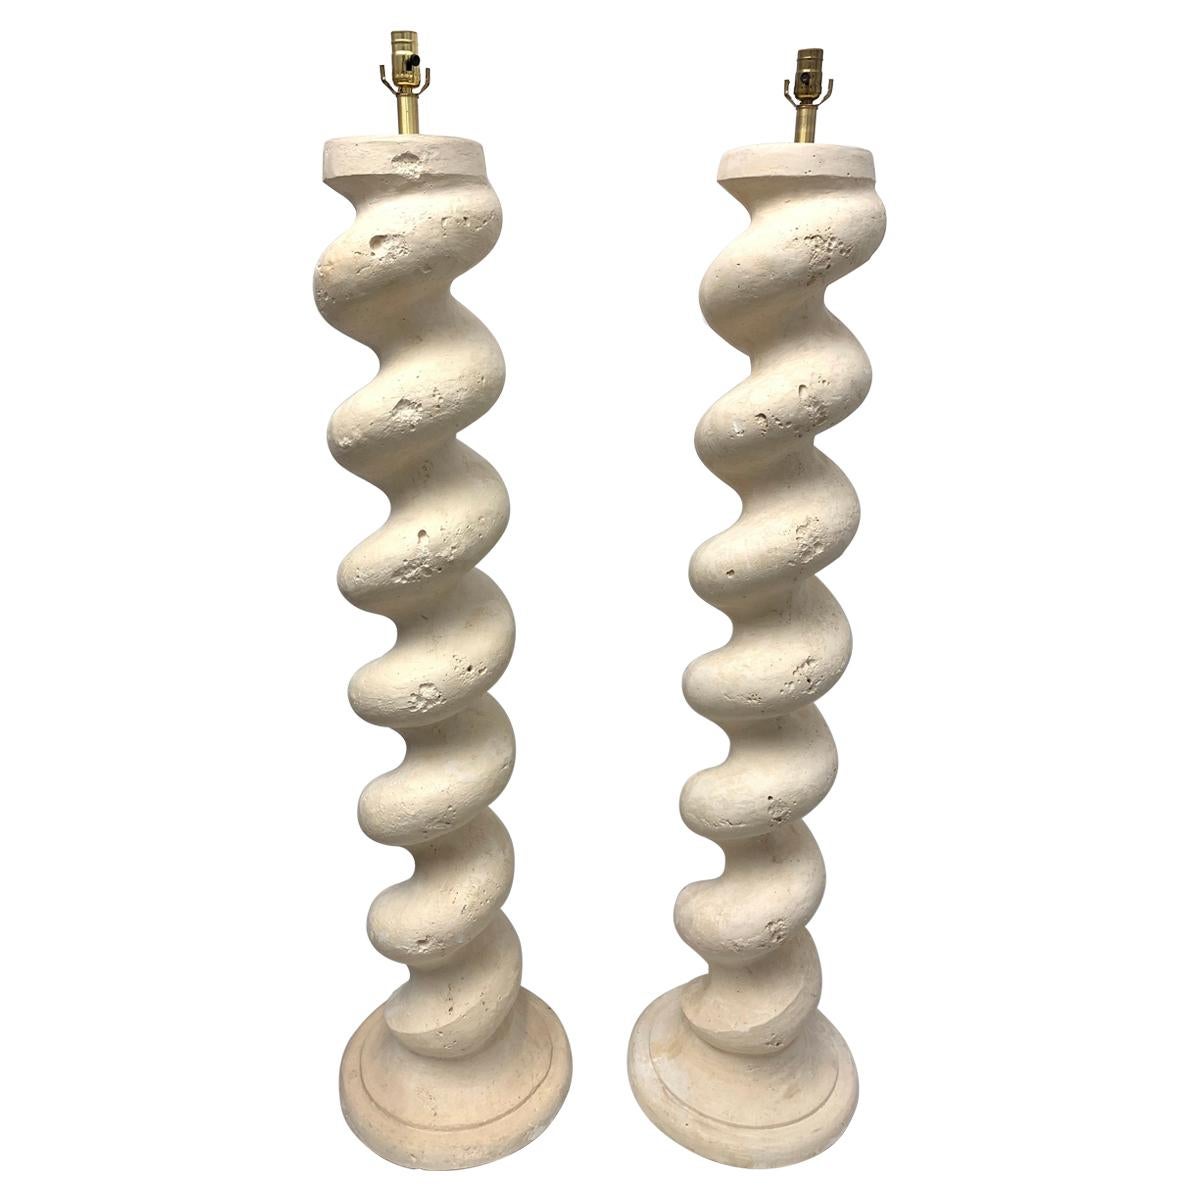 Pair of Architectural Plaster Swirl Floor Lamps by Michael Taylor